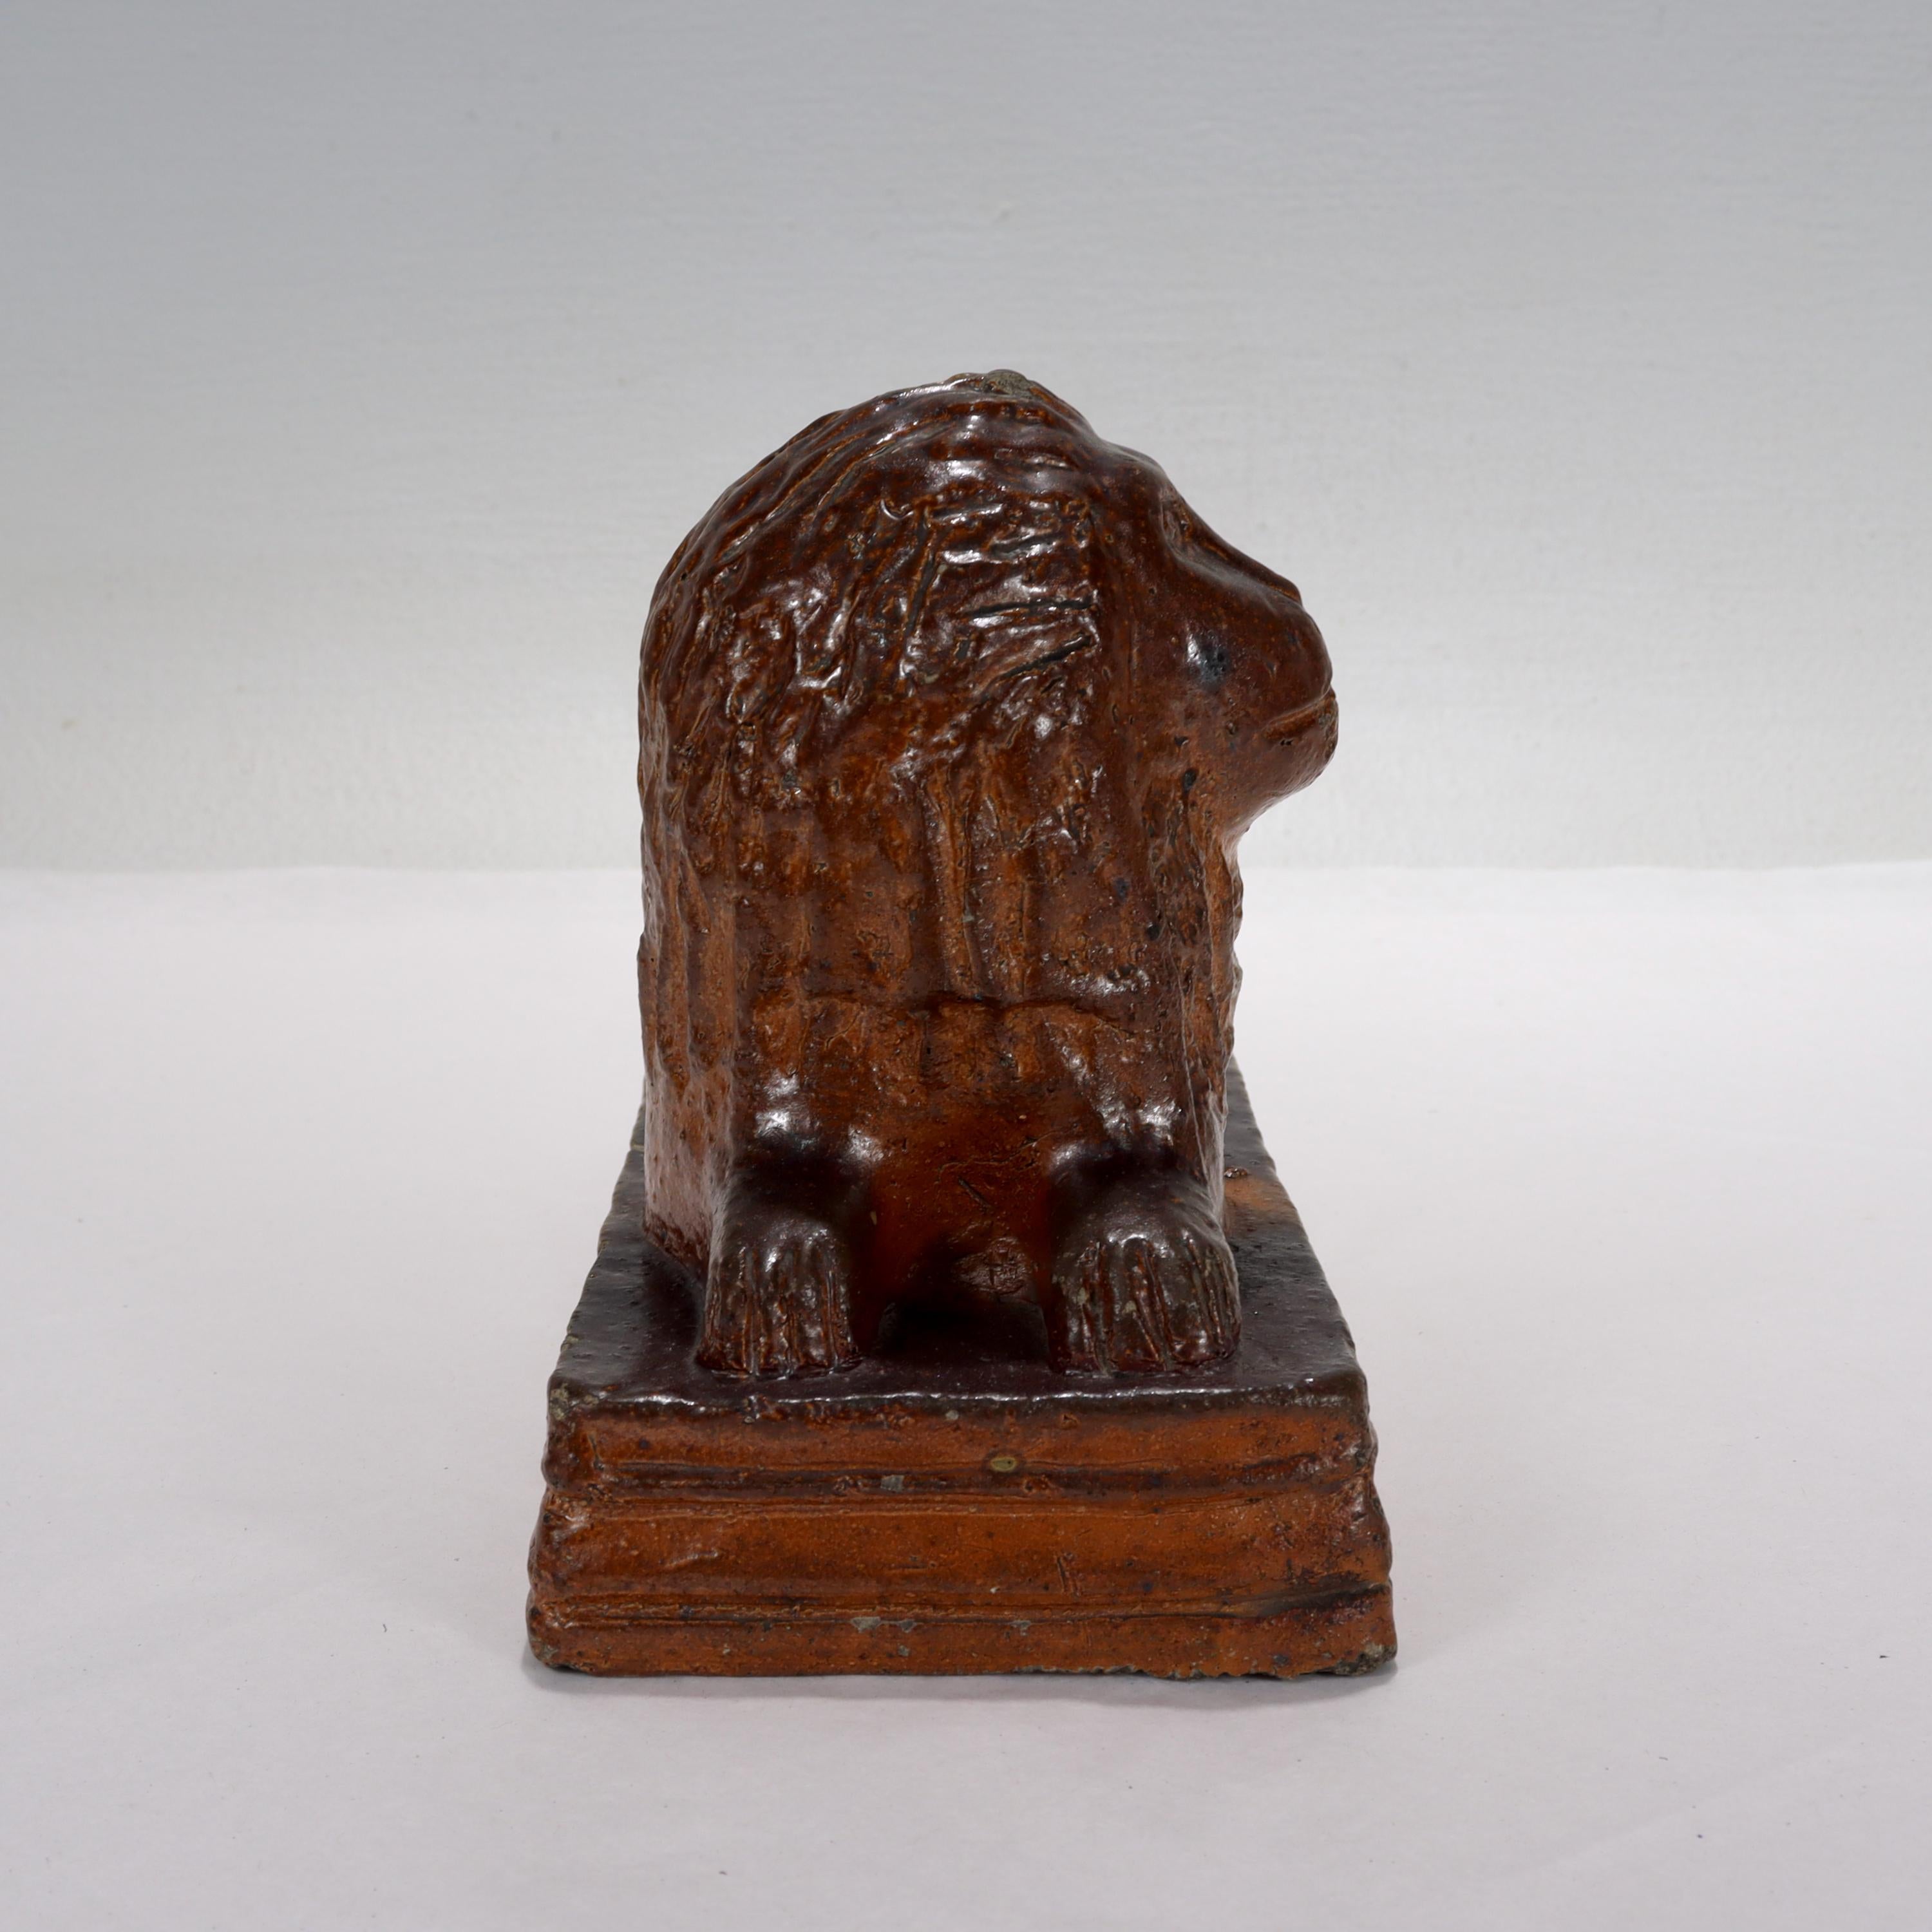 Antique Signed American Folk Art Sewer Tile or Redware Pottery Lion Figurine In Good Condition For Sale In Philadelphia, PA